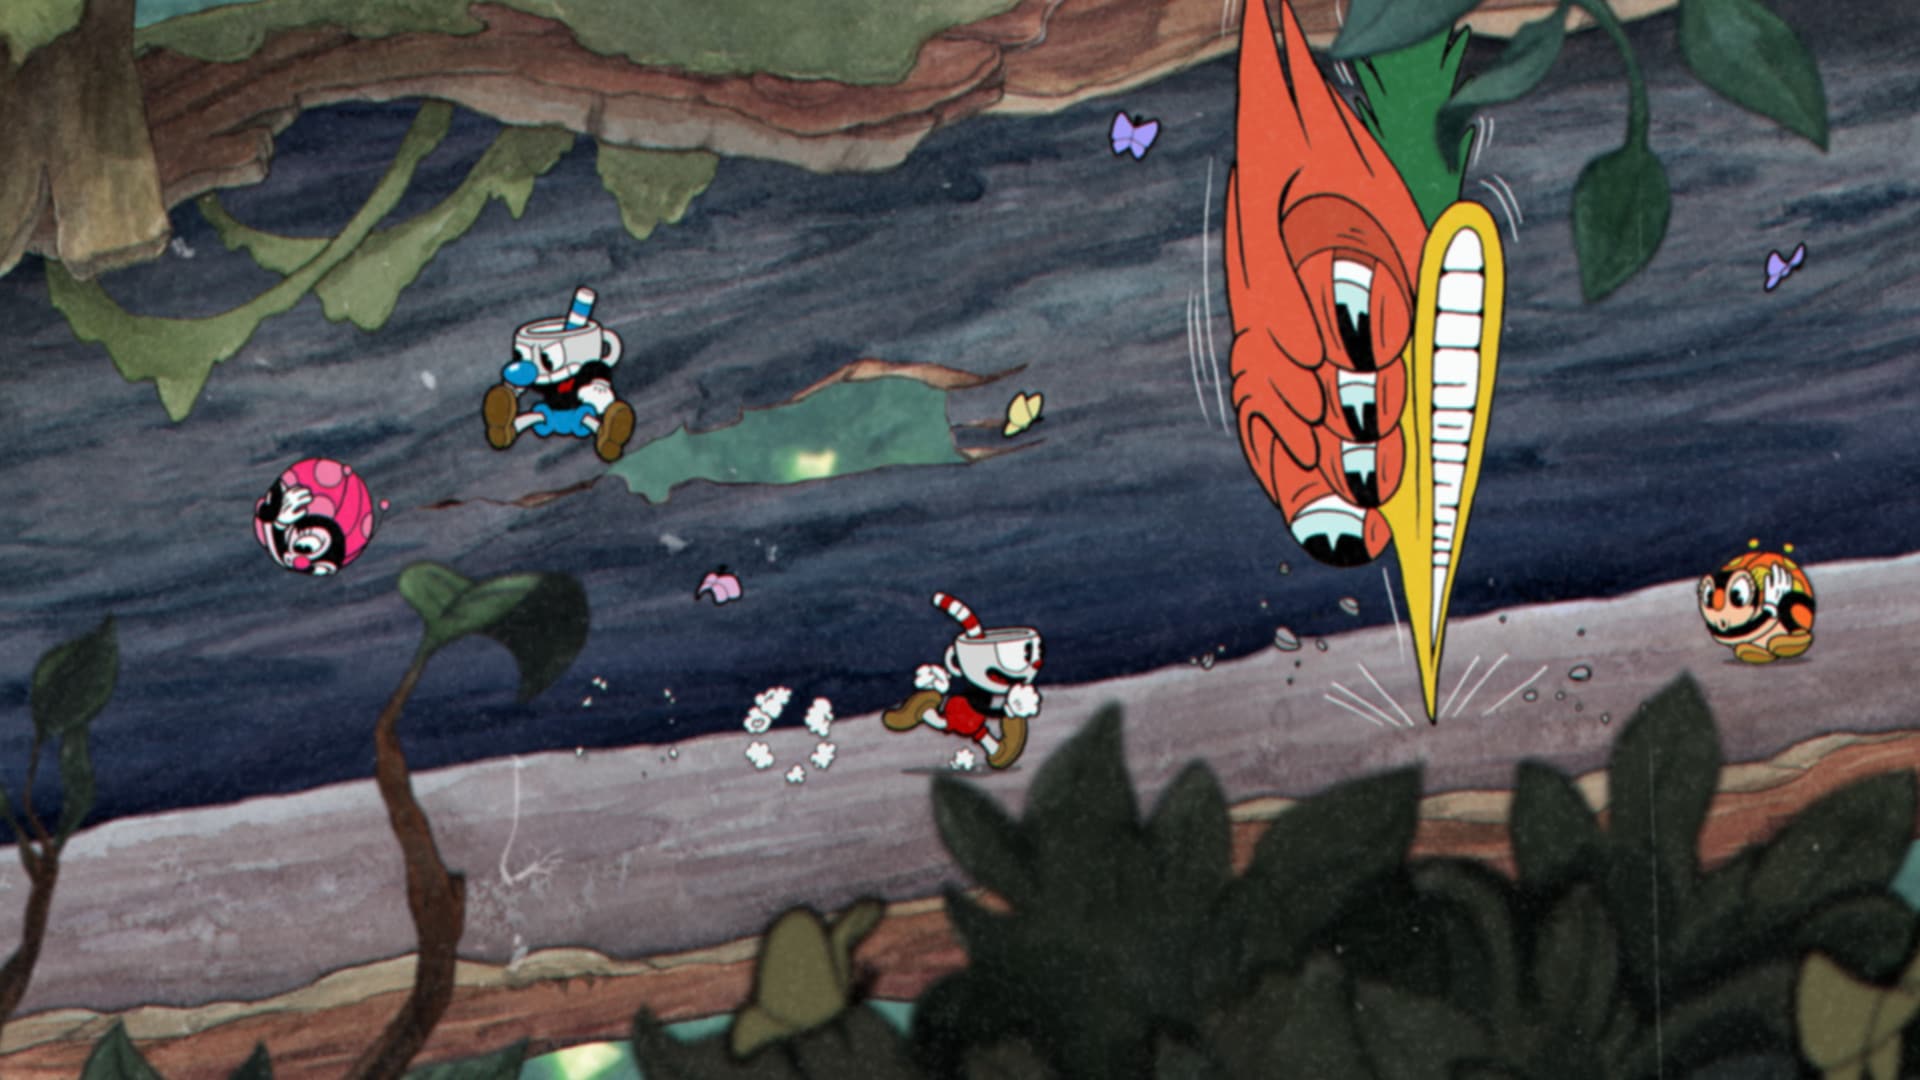 Cuphead Mobile Android Apk Full Version Game Free Download